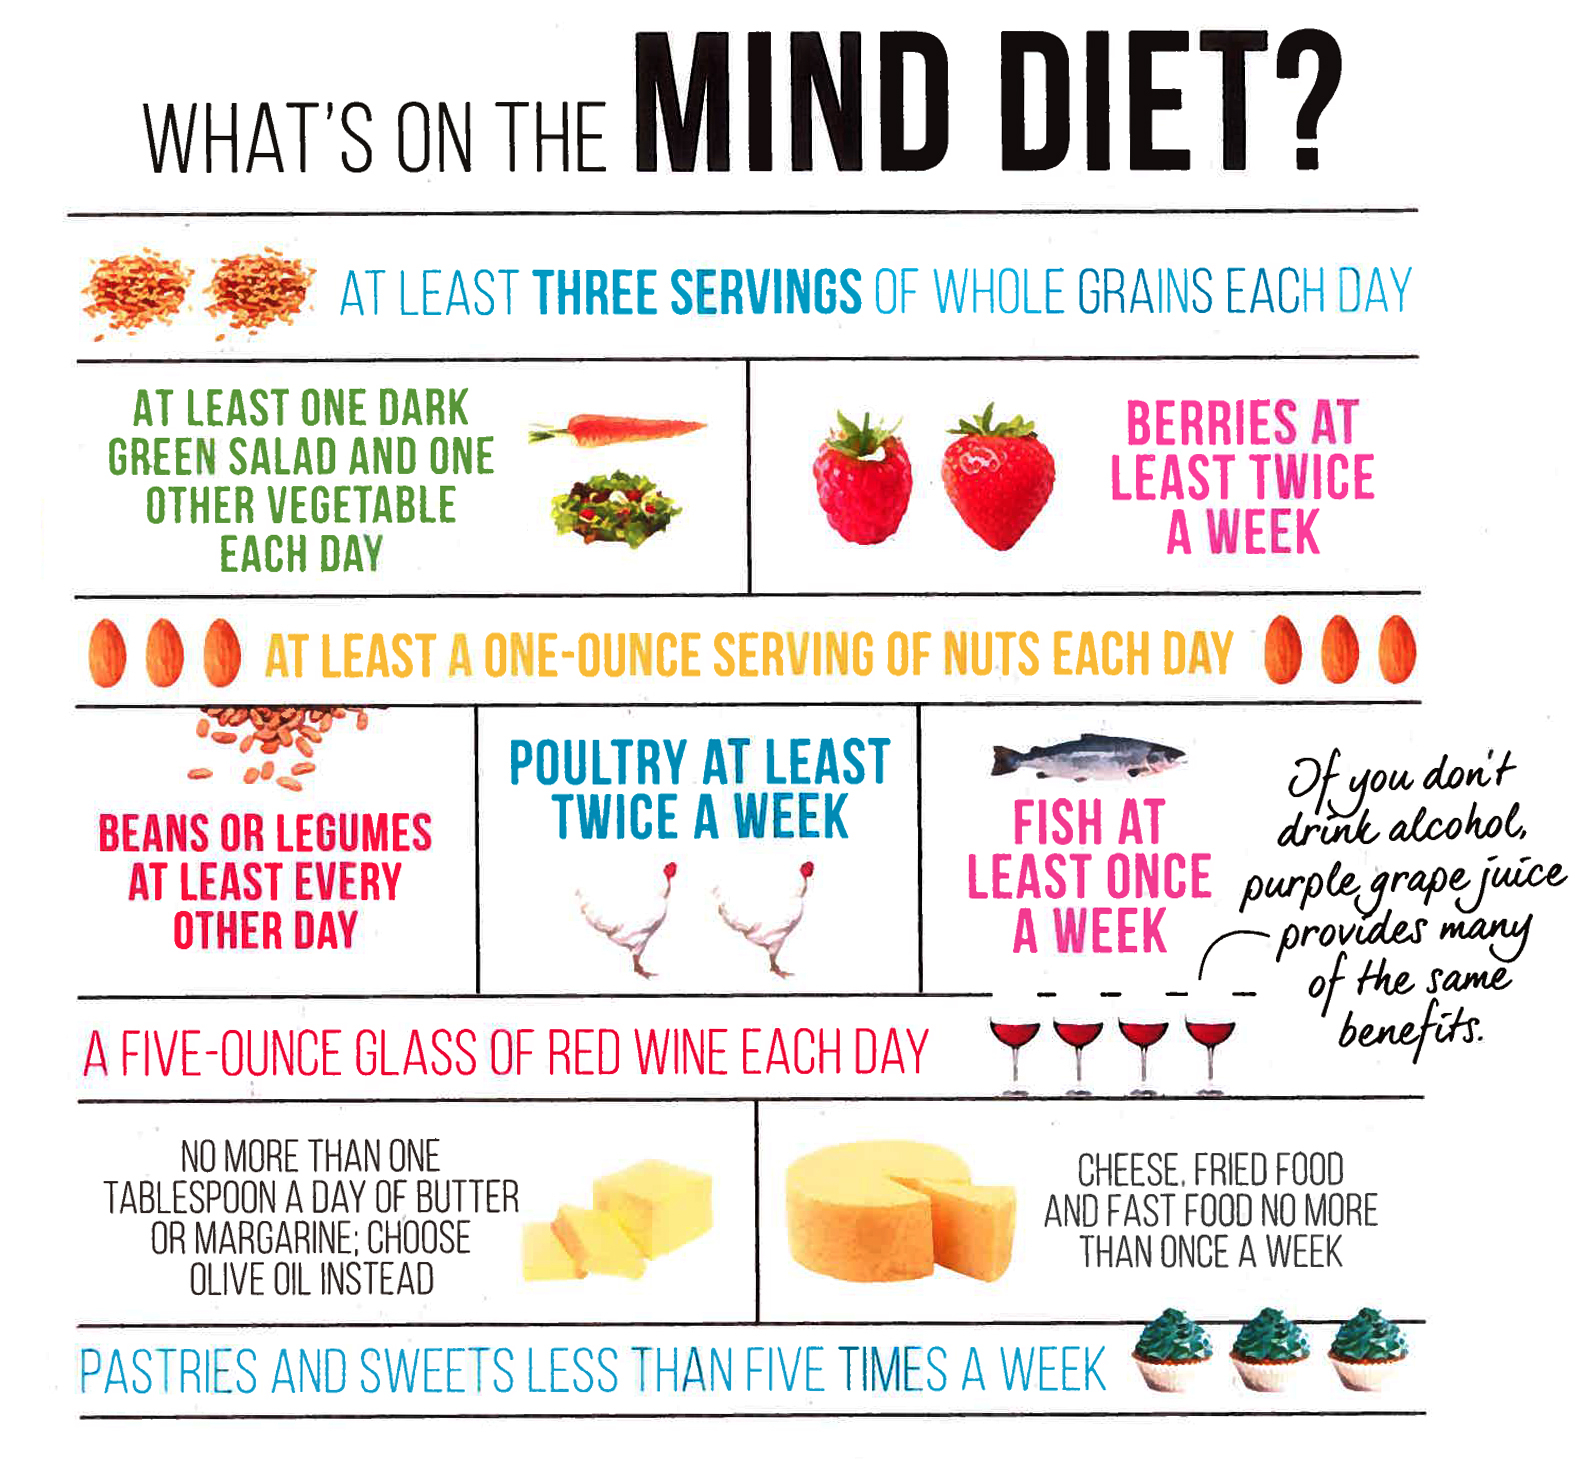 The MIND Diet For Fighting Dementia LIFE SUPPORT